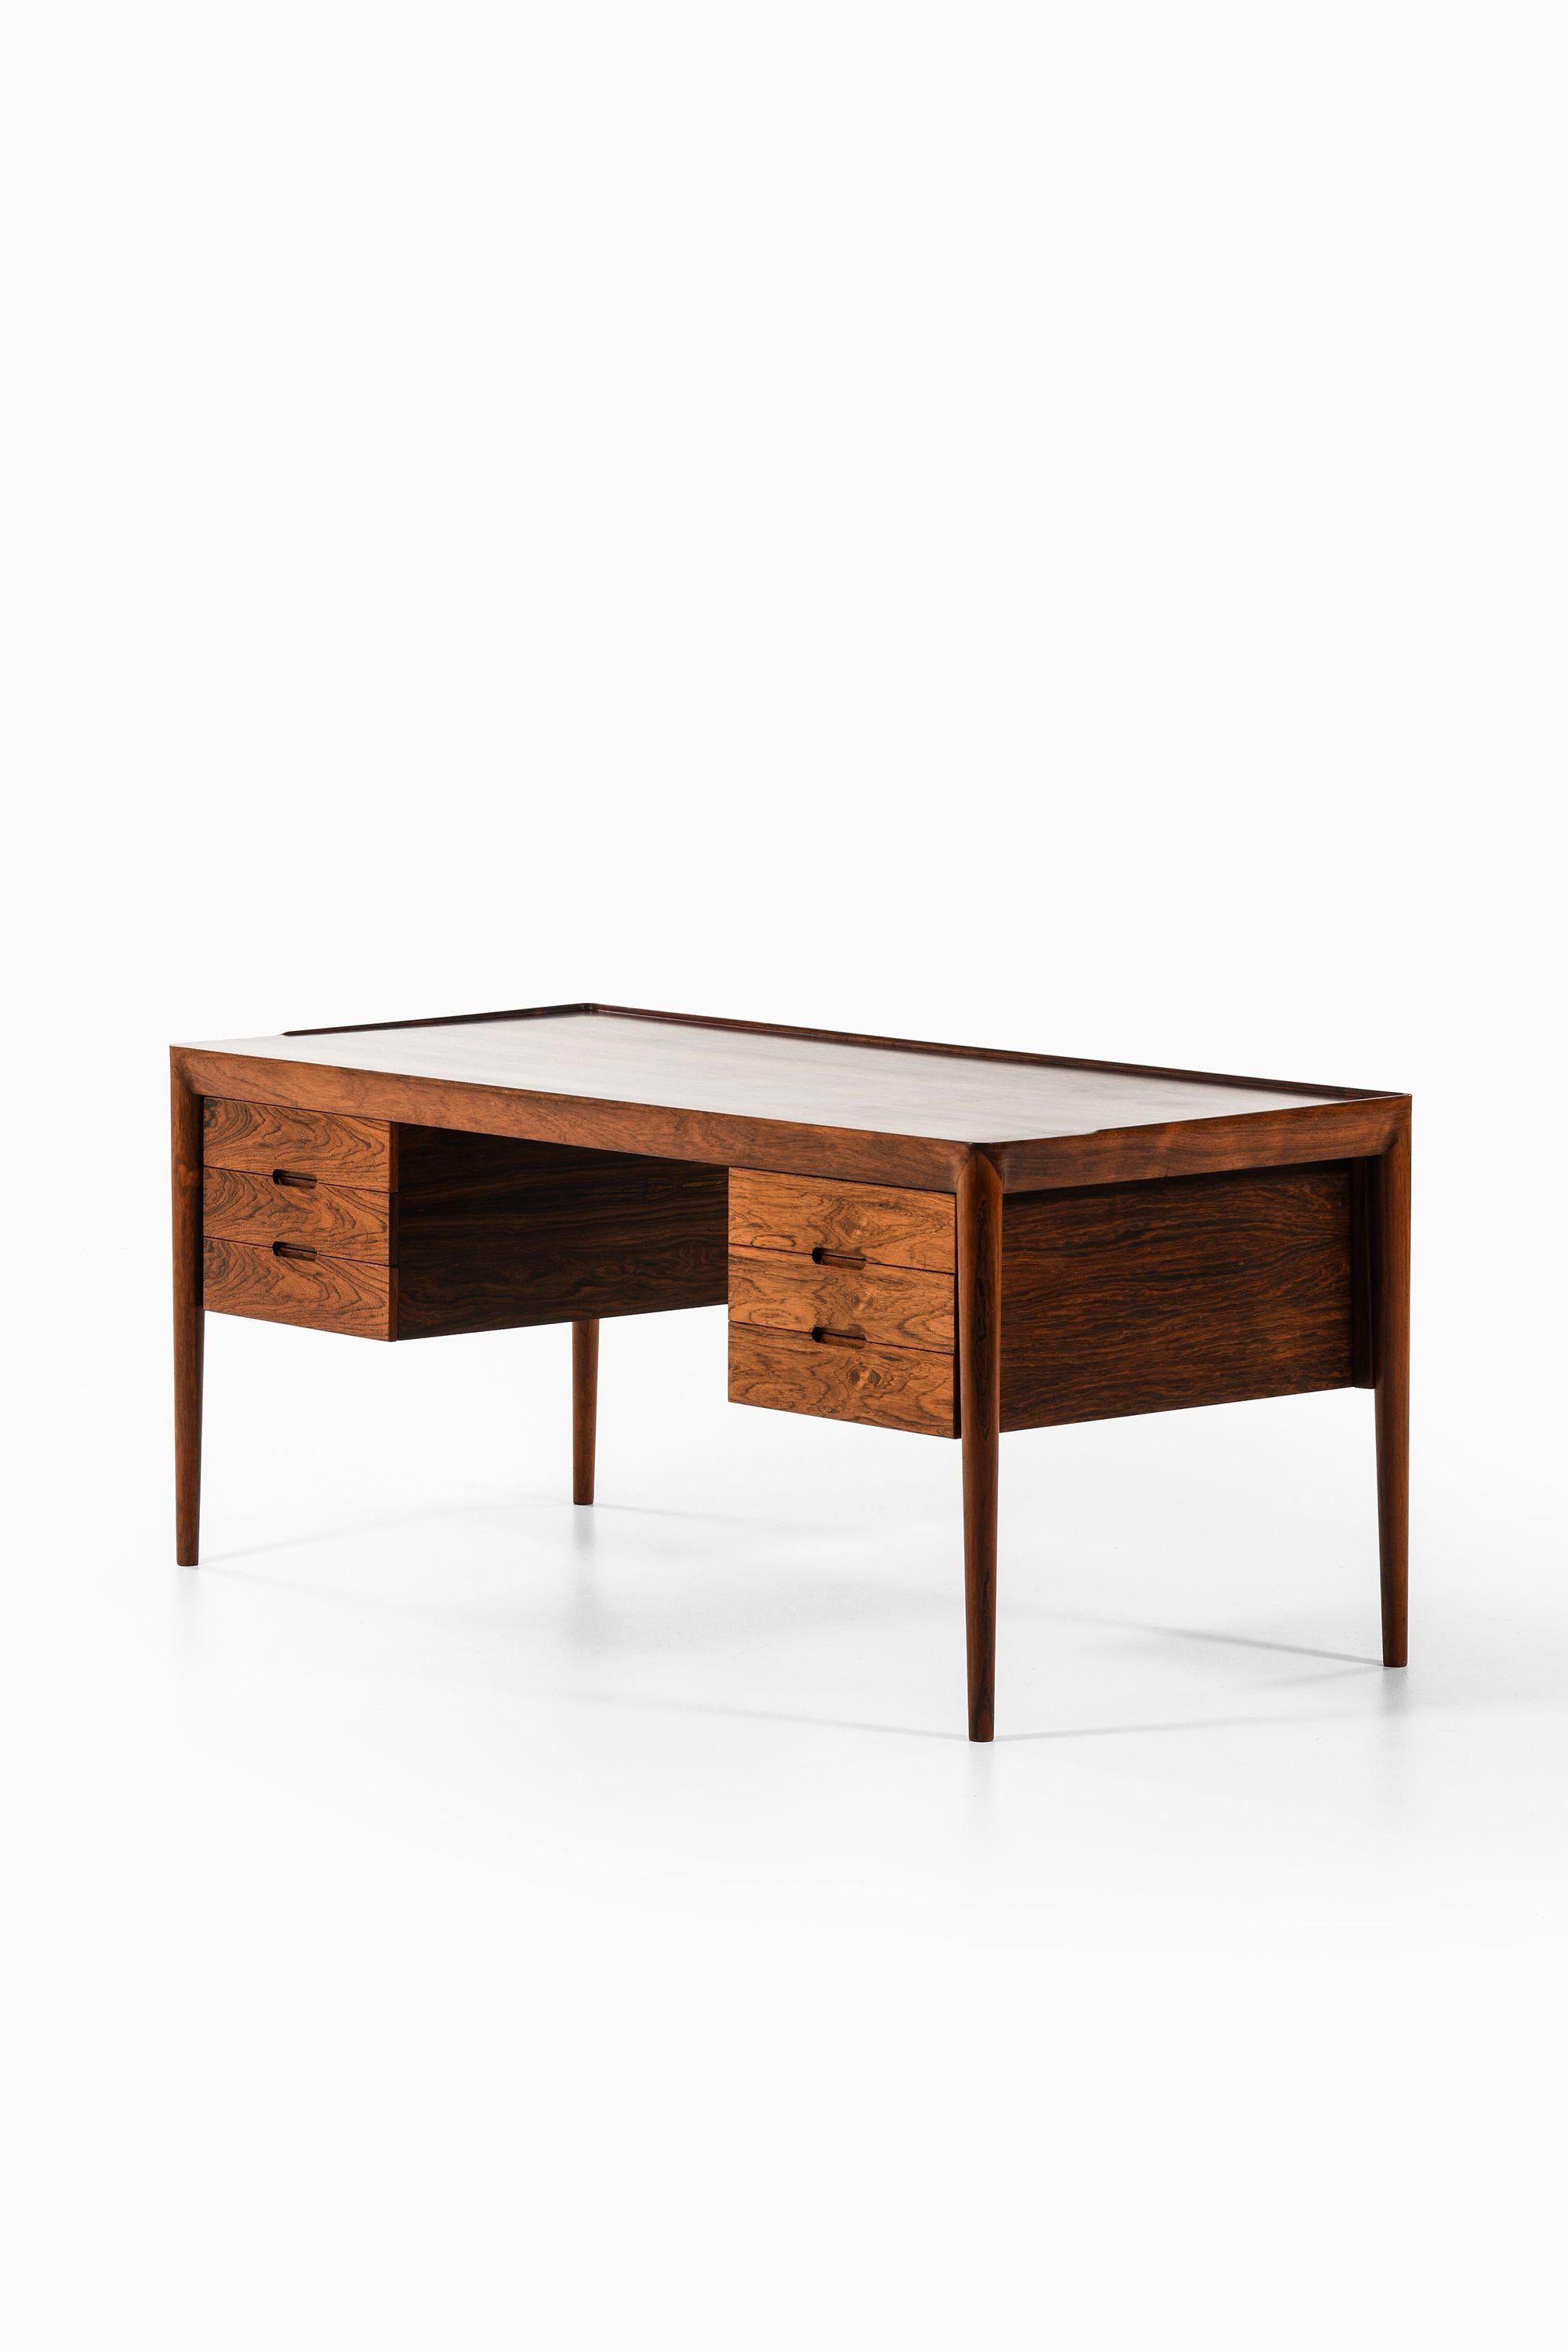 Freestanding Desk in Rosewood by Erik Riisager Hansen, 1950’s

Additional Information:
Material: Rosewood
Style: Mid century, Scandinavia
Produced by Haslev møbelsnedkeri in Denmark
Dimensions (W x D x H): 160 x 75 x 71 cm
Condition: Good vintage